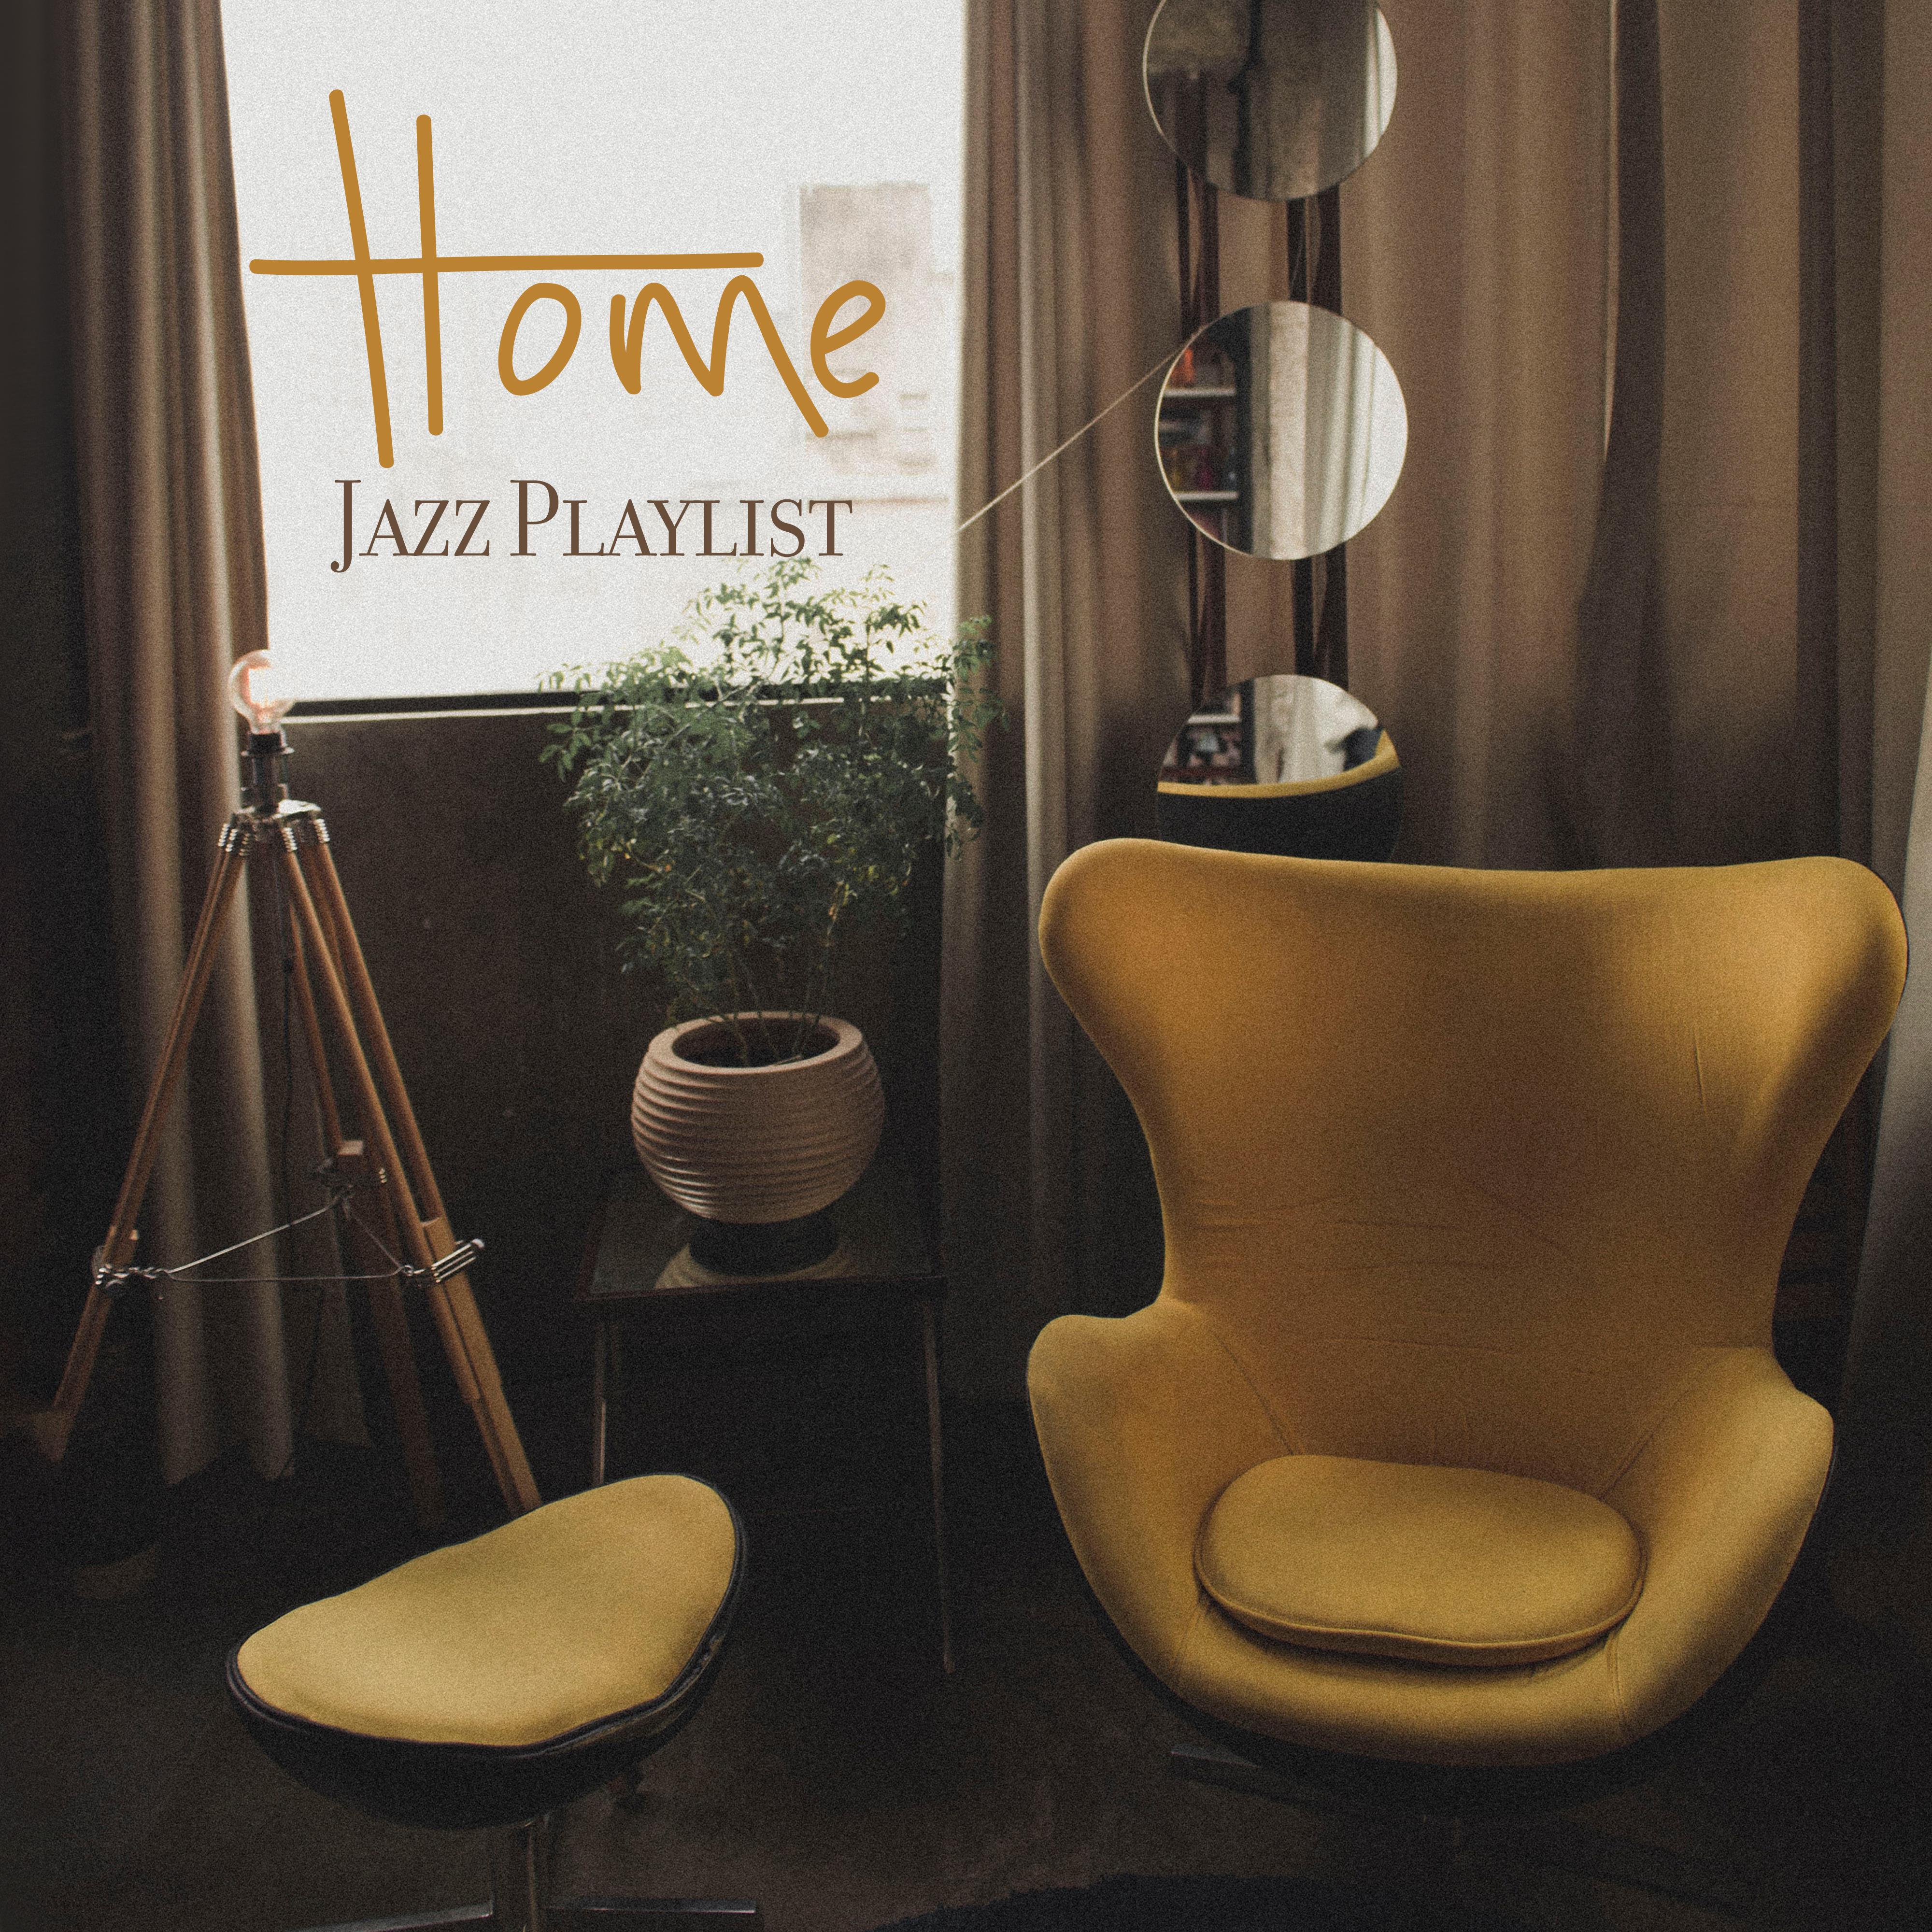 Home Jazz Playlist - 15 Music Tracks for Home Relaxation and Rest